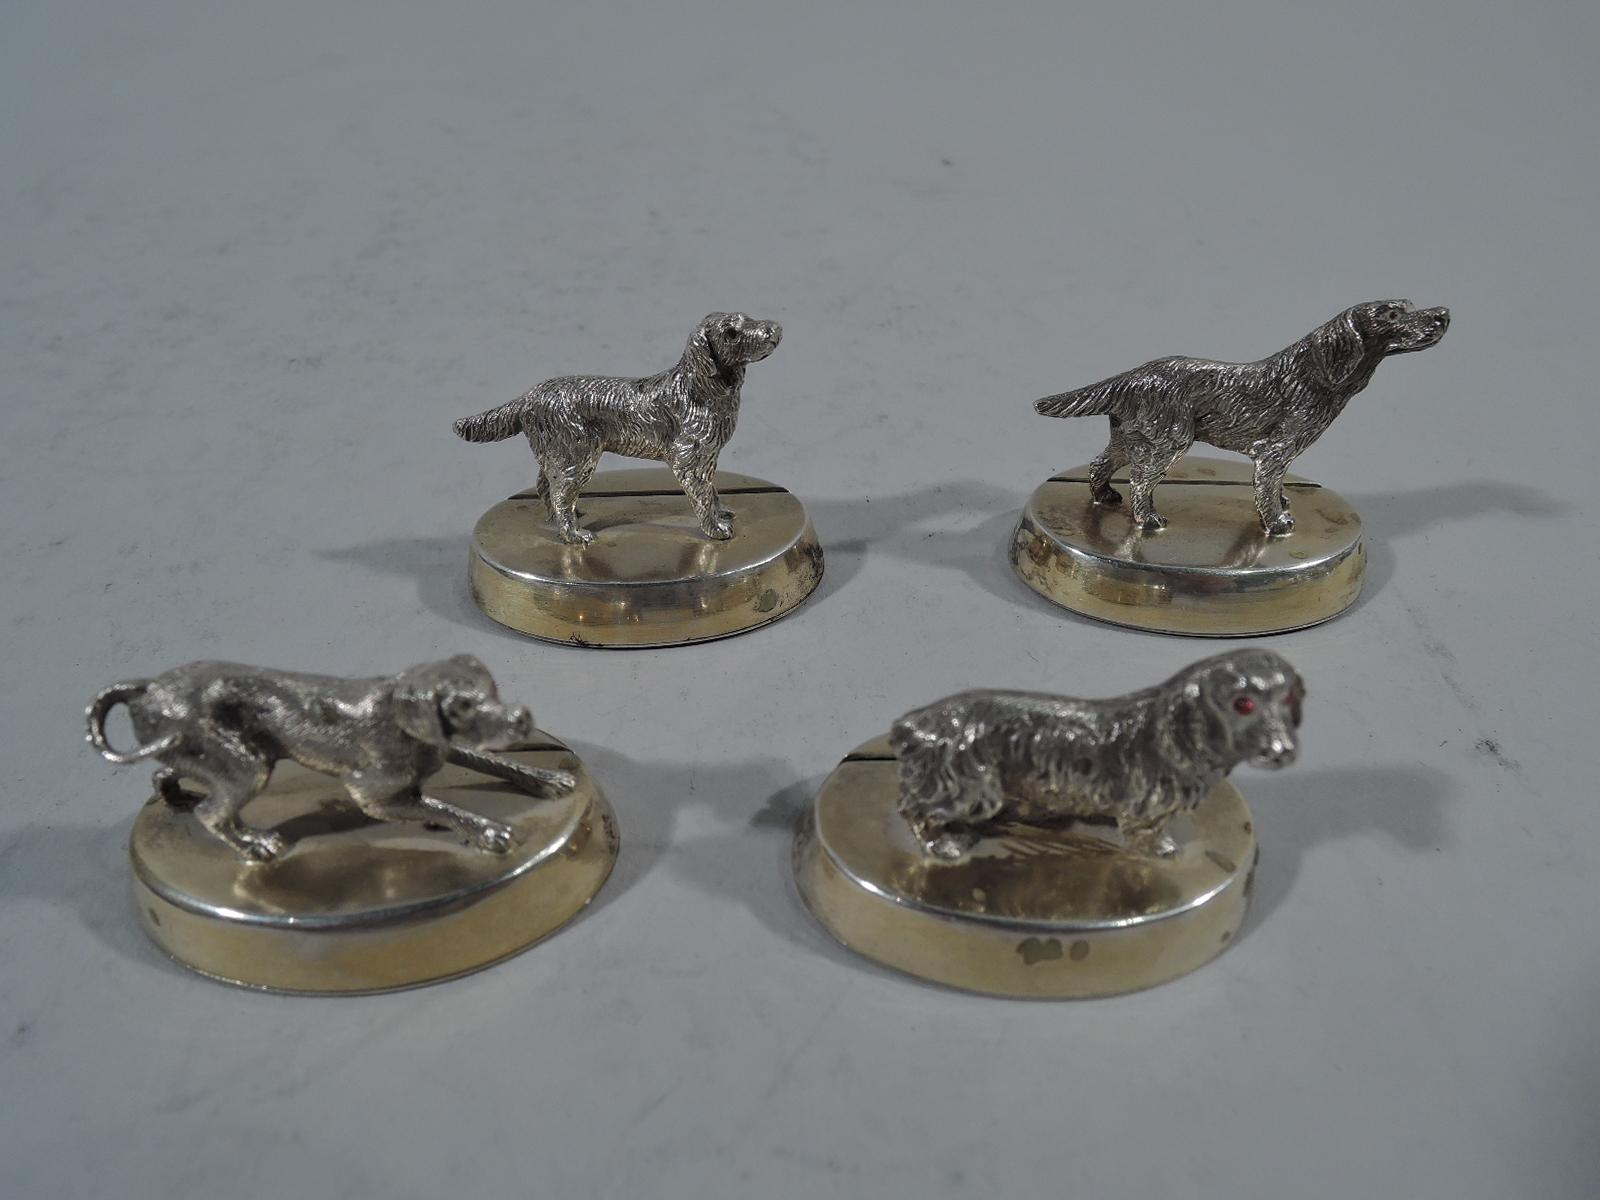 Set of 4 George V sterling silver place card holders. Made by Sibray Hall in London in 1922. Each: Cast canine figure mounted to oval gilt-washed base with slit. A canine medley. Each dog different as they are in real life. For a special “pack”